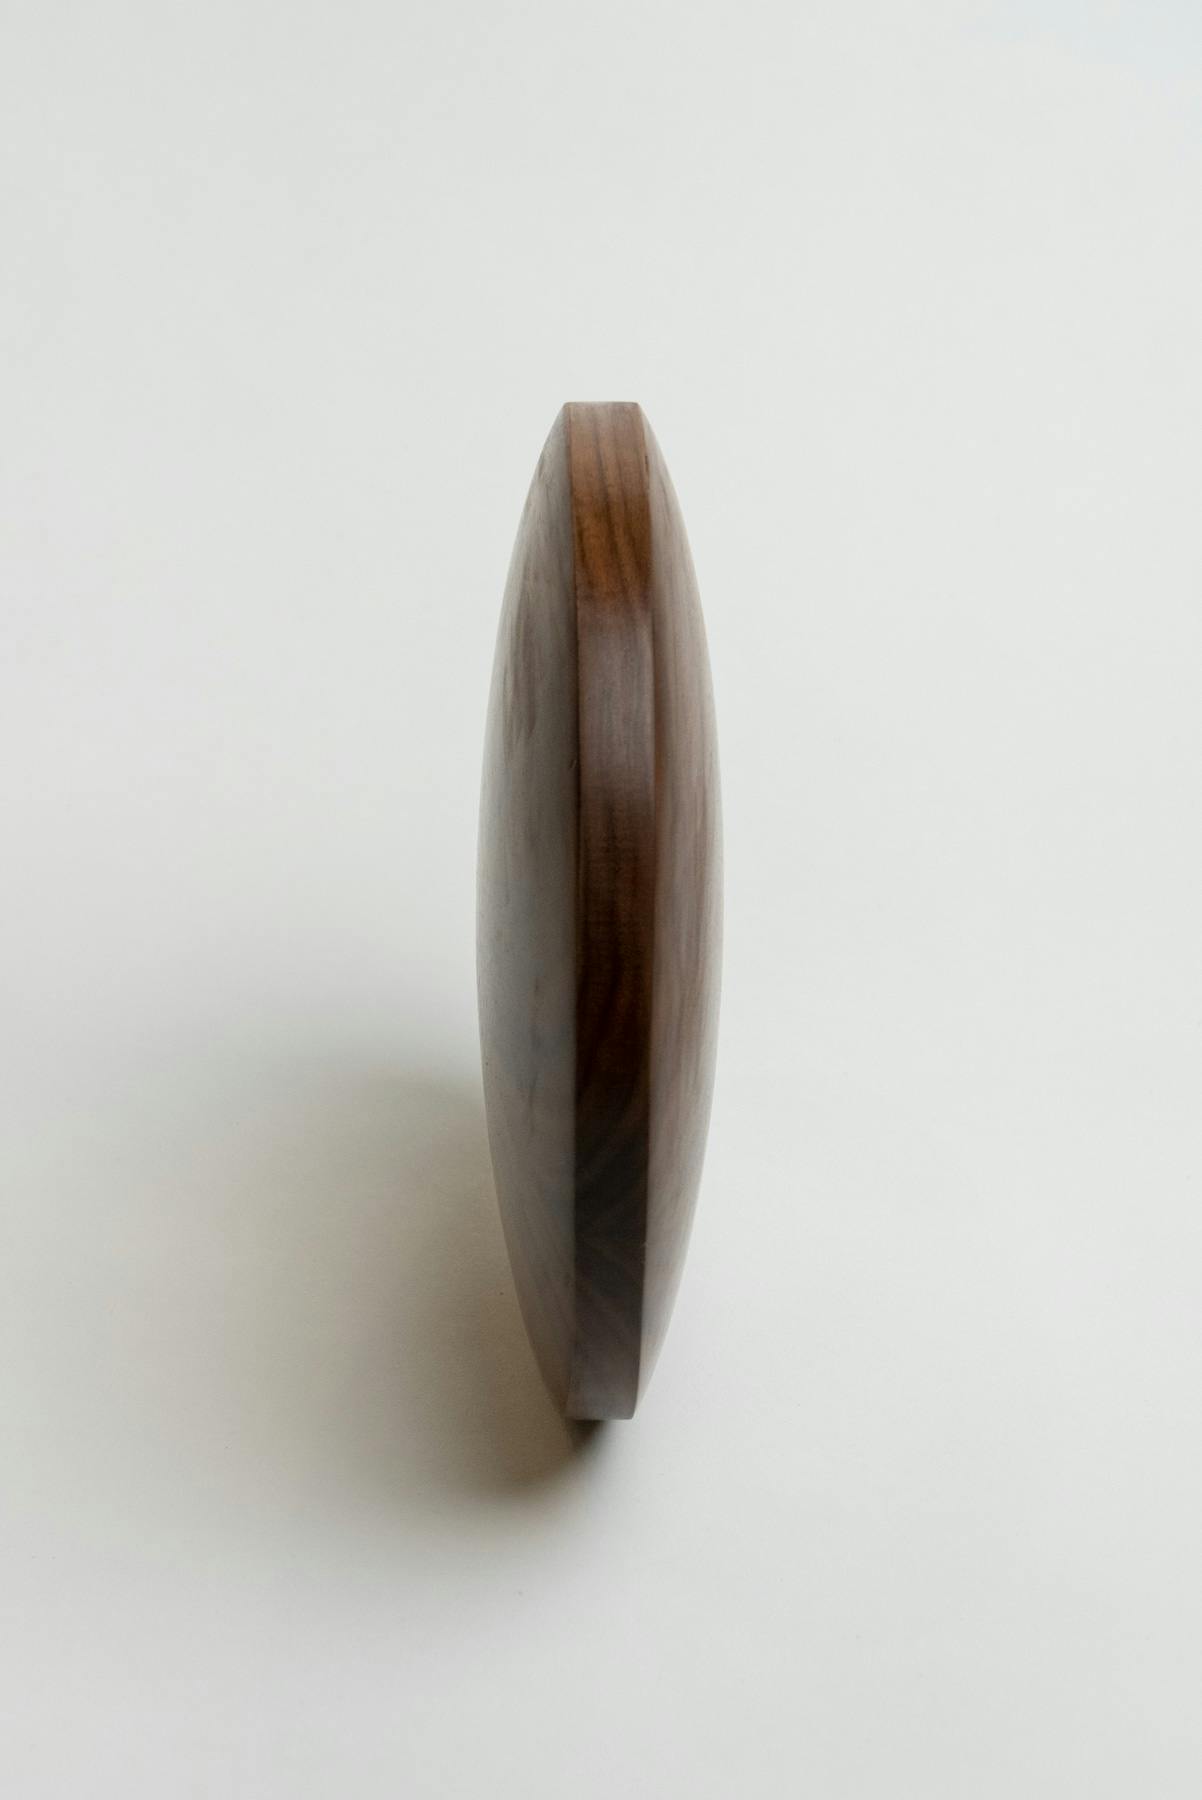 Side view of the walnut disc. This view emphasizes its thinness. The curves of the bulges on both sides also match perfectly.